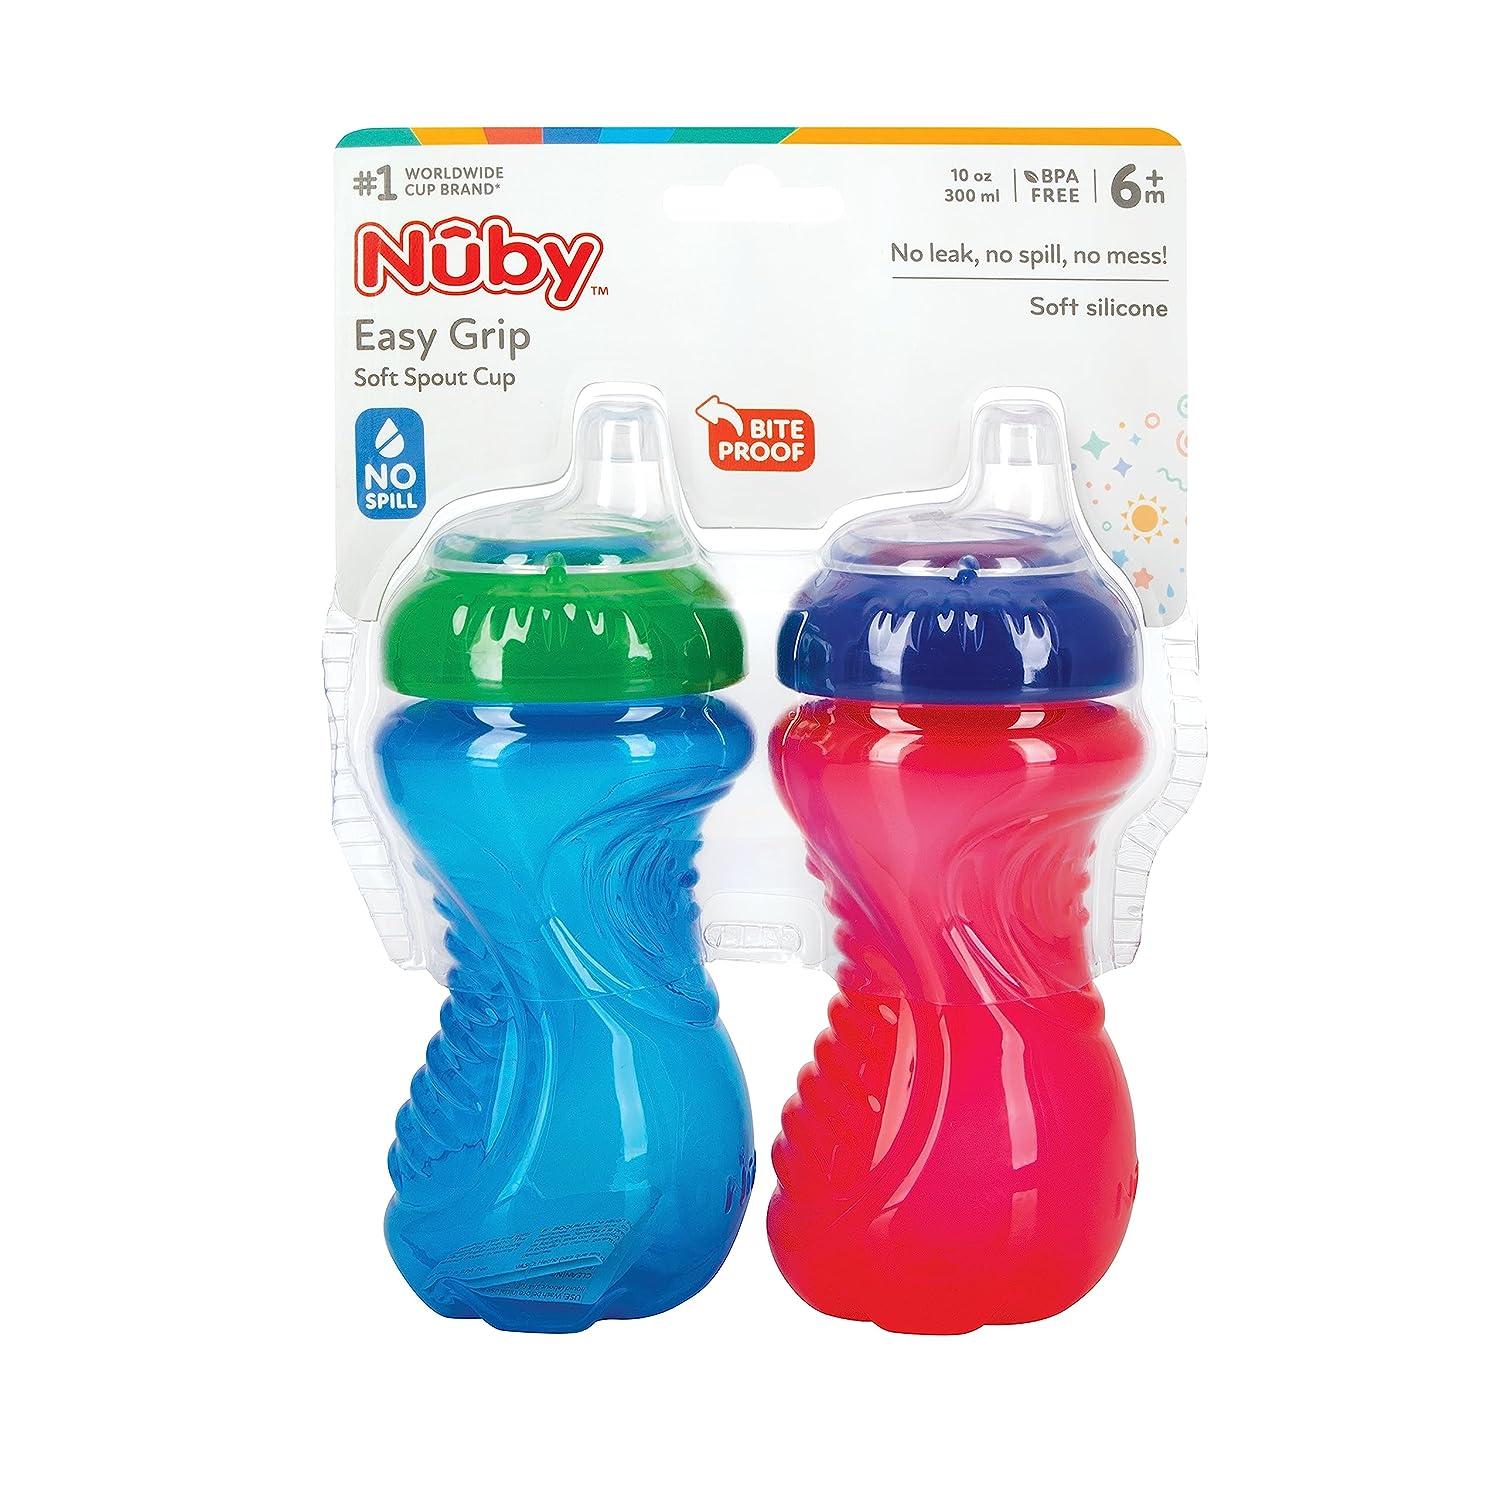 Nuby No-Spill Easy Grip Soft Spout Sippy Cup, 10 fl oz, 3 Count 